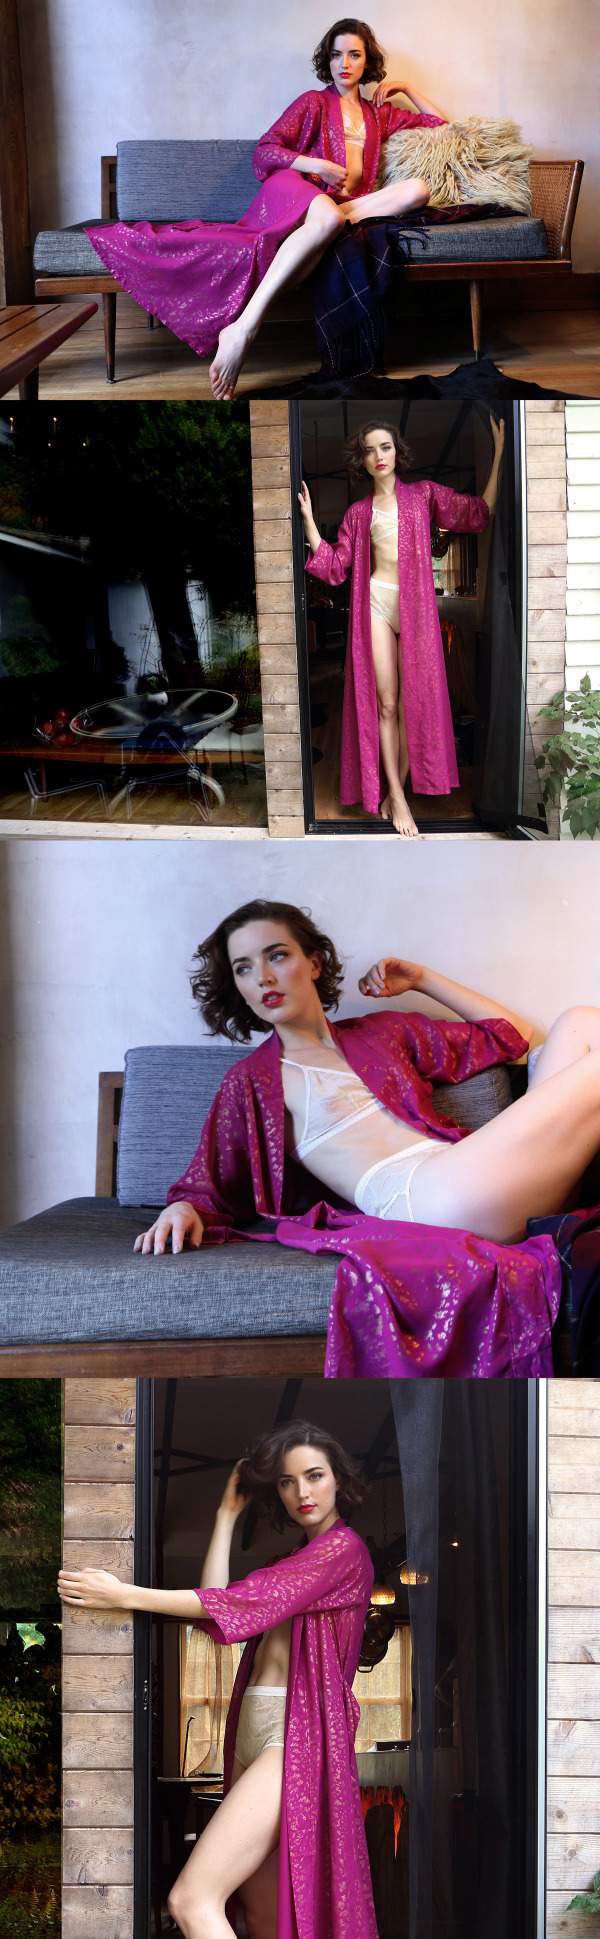 BTS Lingerie - Into the Woods Lookbook: ivory bra and panty & sheer pink robe